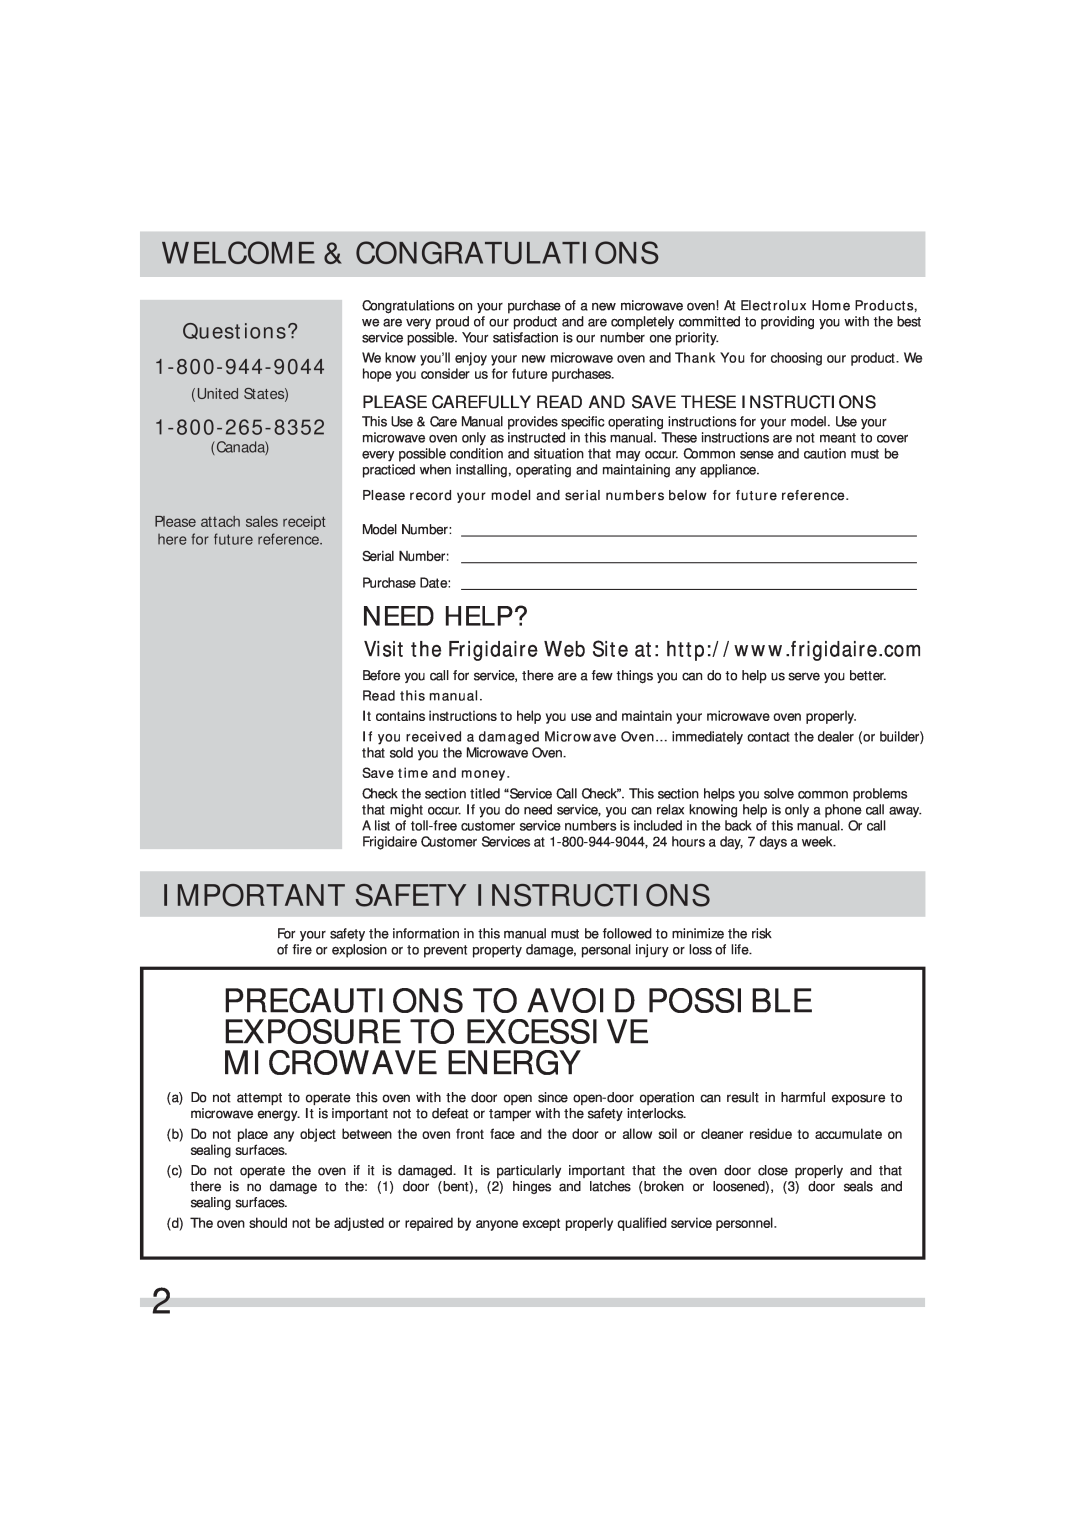 Frigidaire FGMV173KW Welcome & Congratulations, Important Safety Instructions, Questions?, Need Help?, Read this manual 